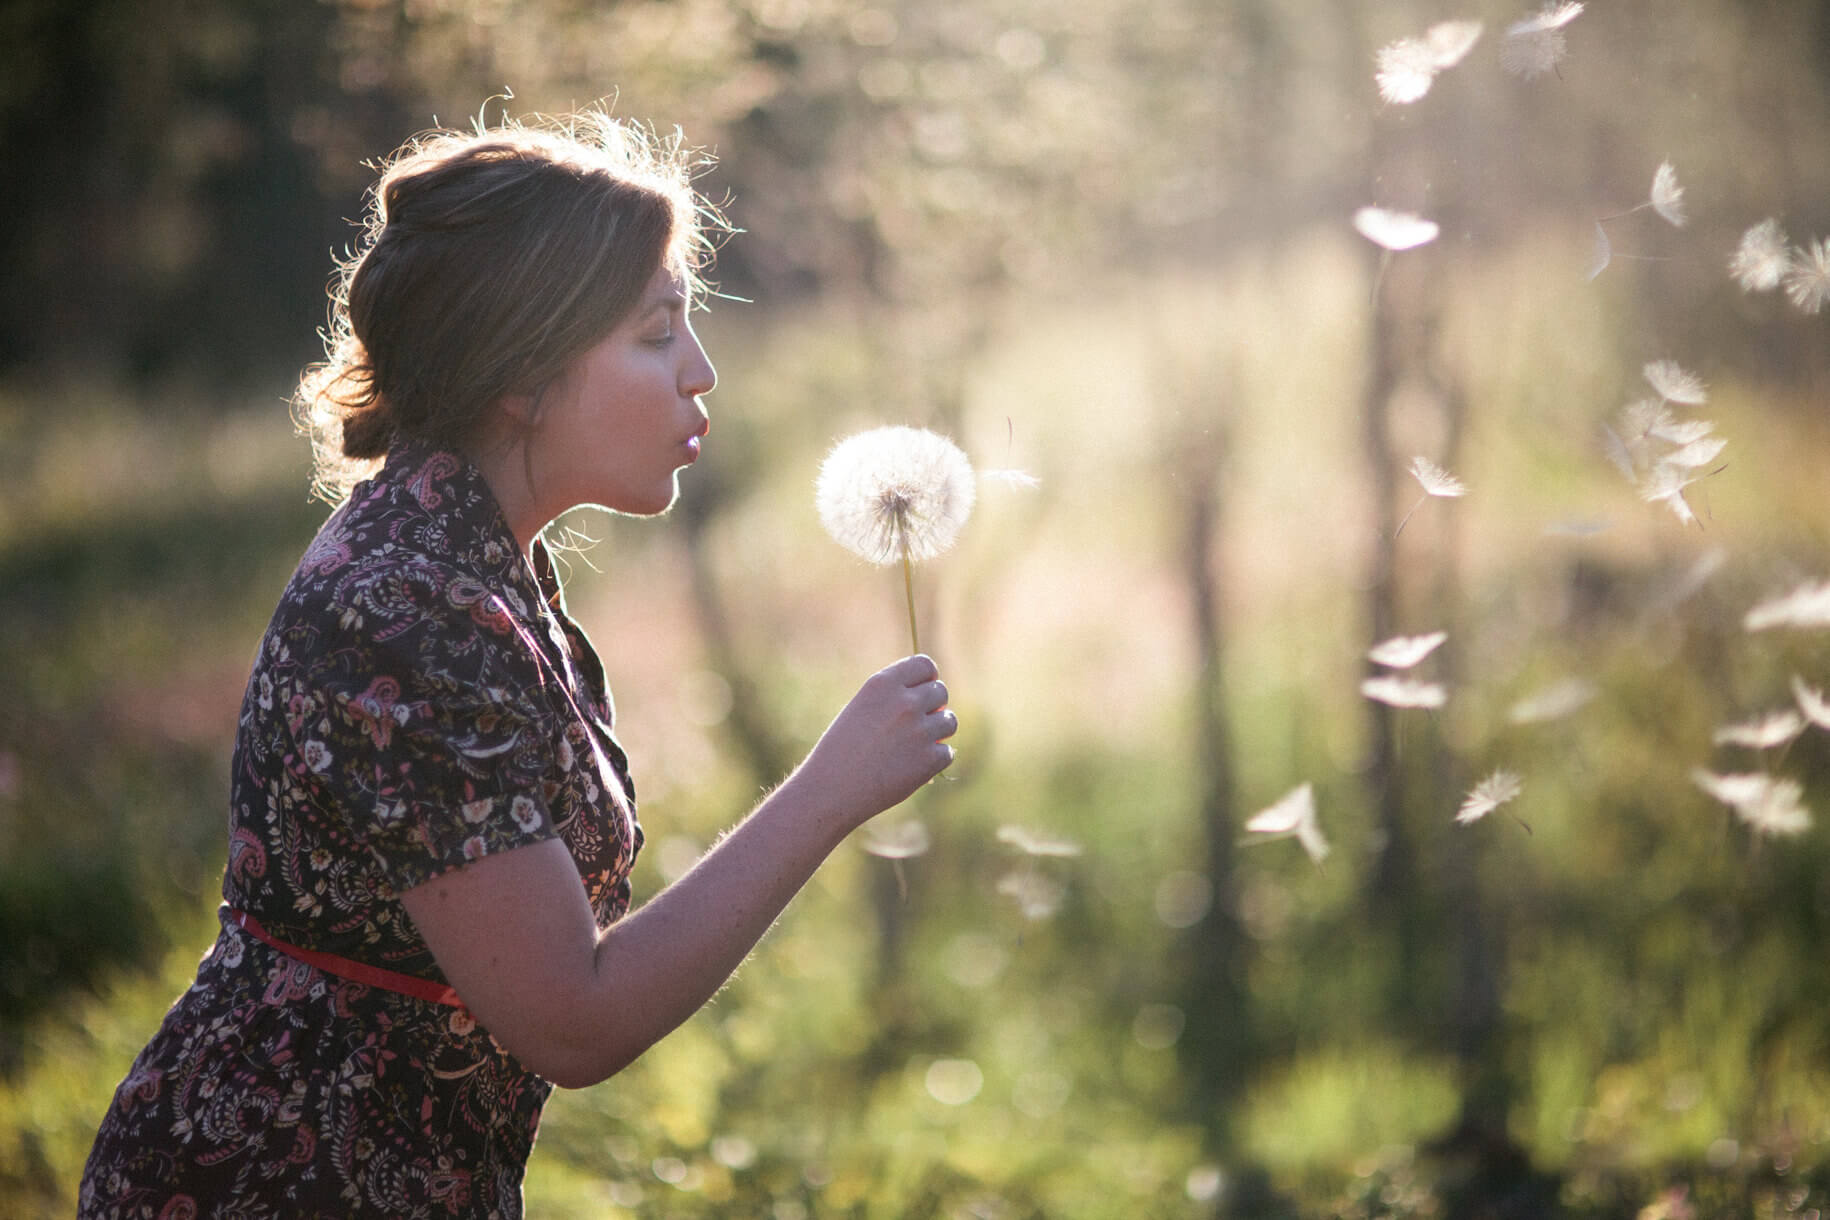 A woman blows dandelion fluff off a flower during her portrait session in Greenough Montana